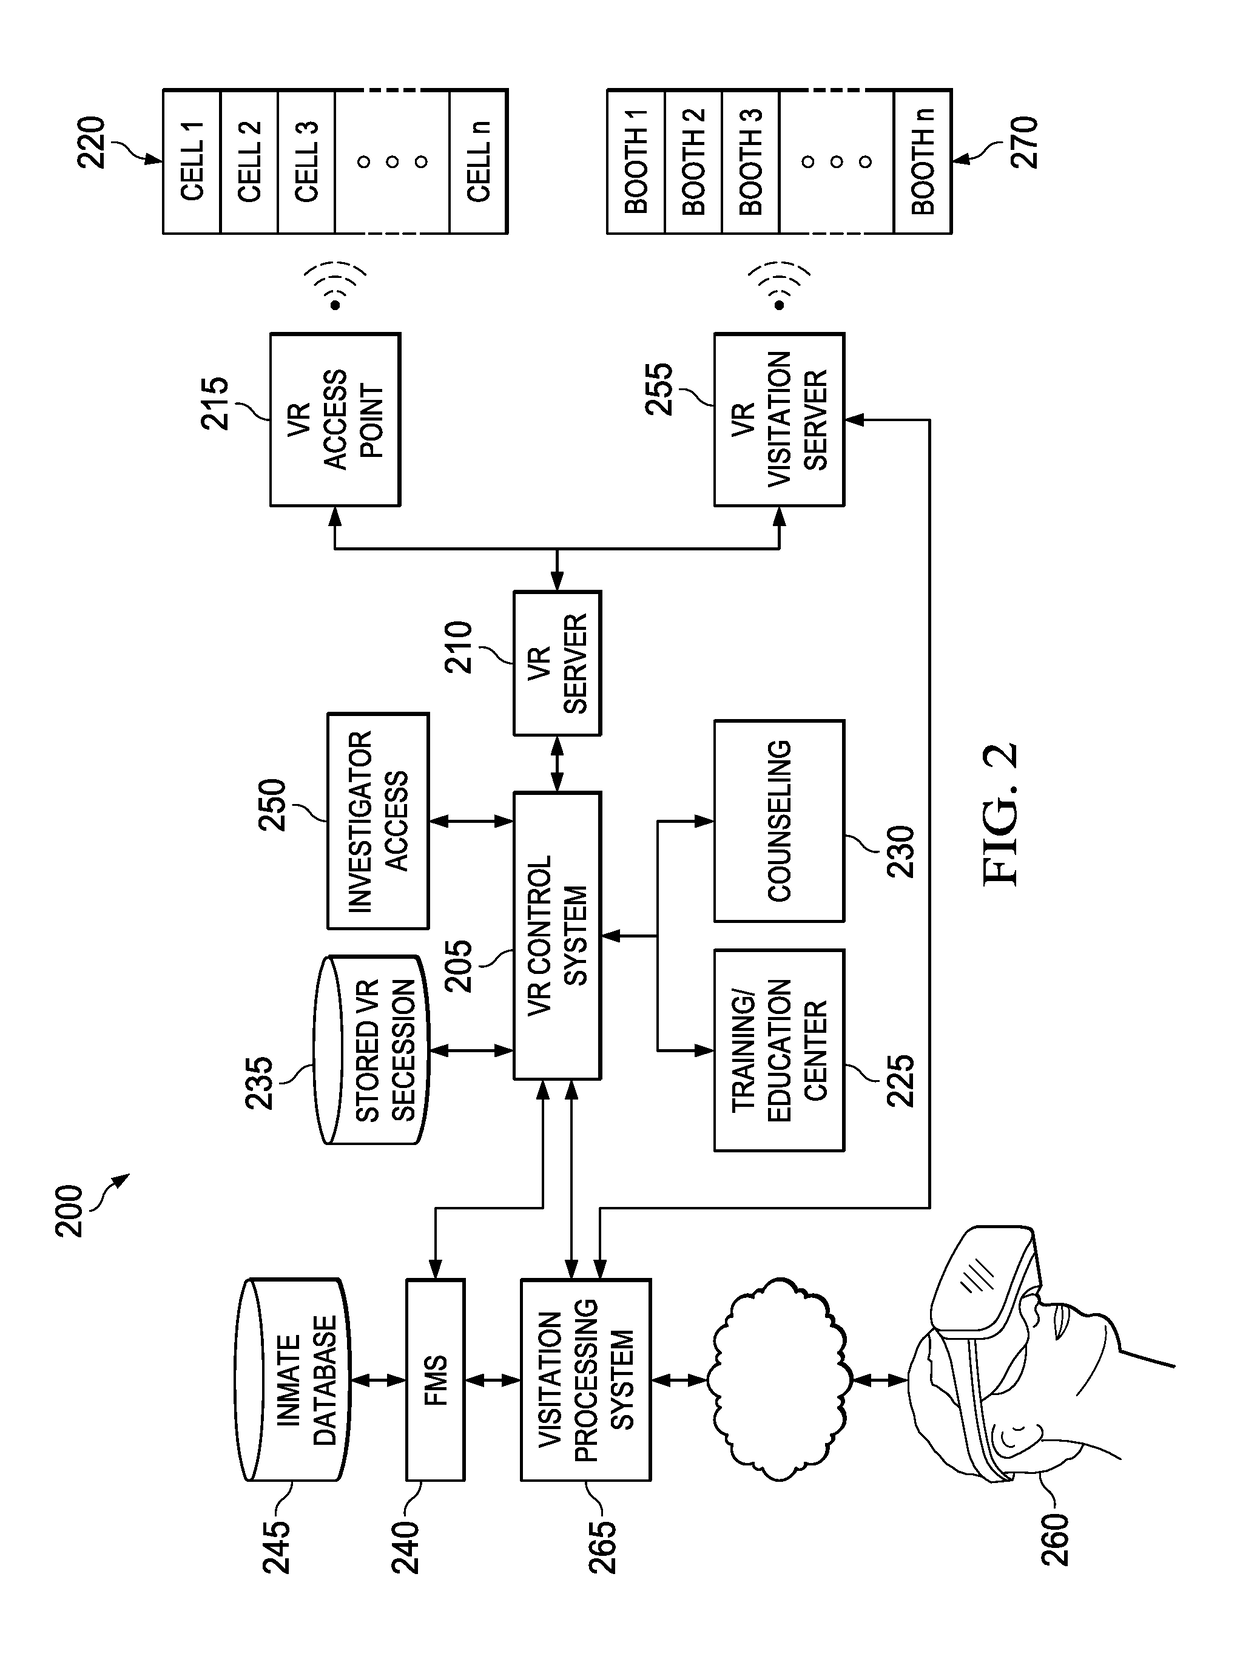 Virtual reality services within controlled-environment facility